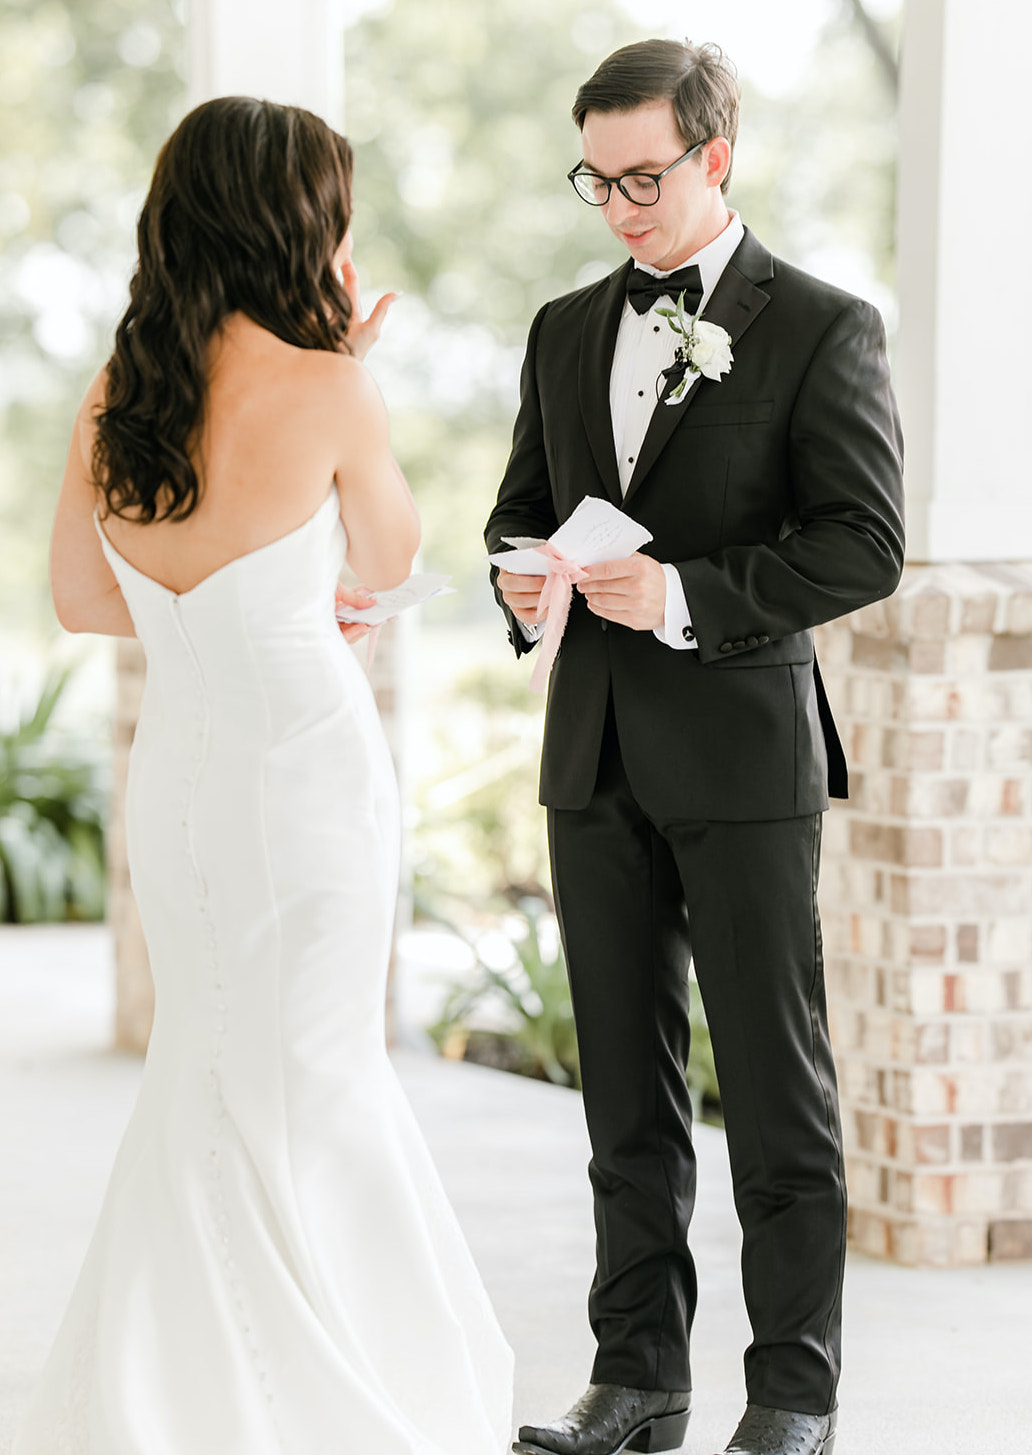 A bride and groom read their vows to each other outside at a Texas venue.